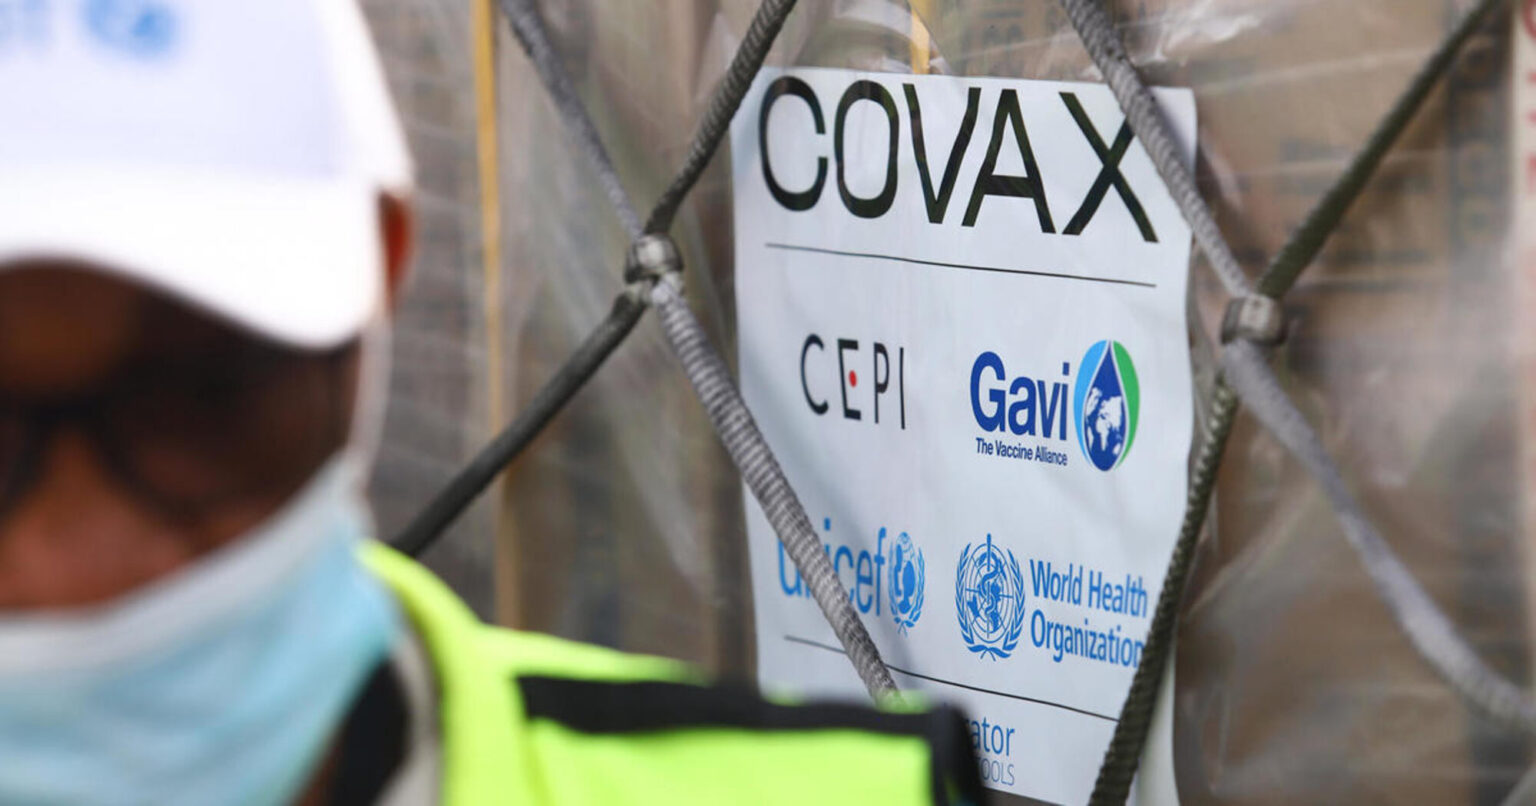 The World Health Organization is working to make sure all nations have equal access to the COVID-19 vaccines. Find out how the Covax program works here.